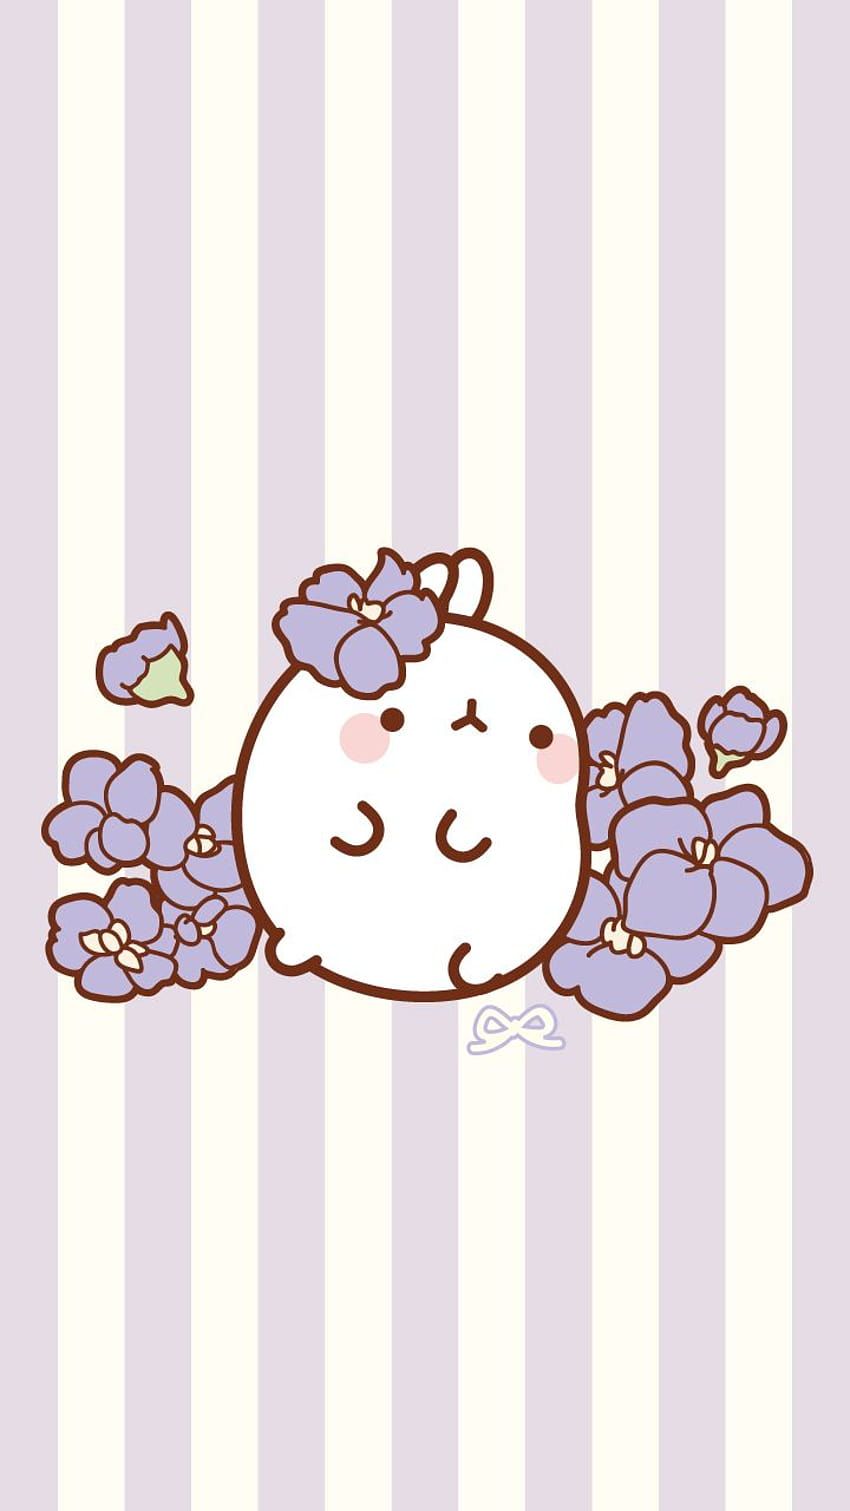 A cute white bunny with purple flowers - Molang